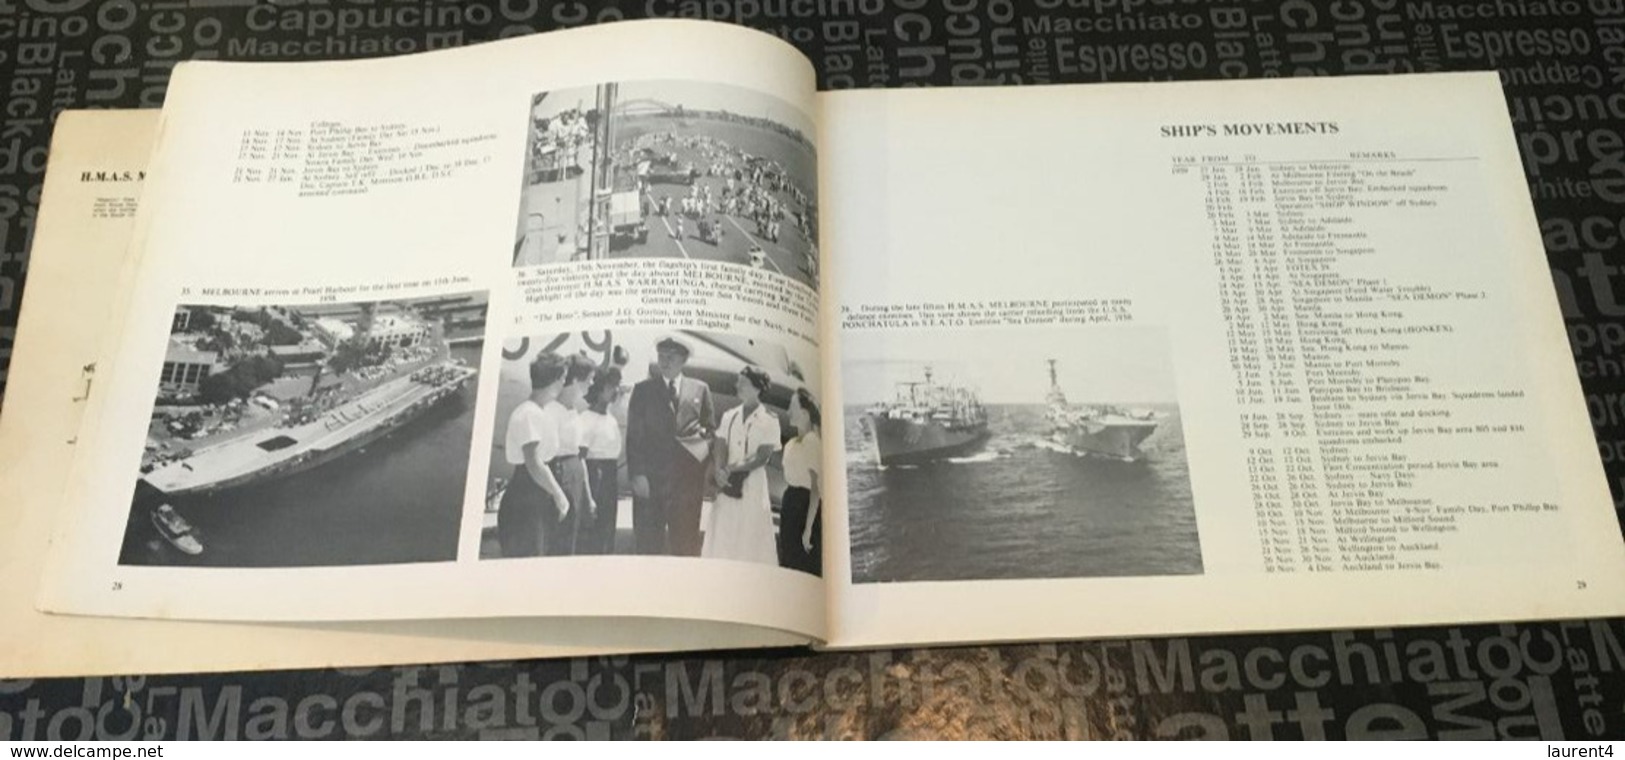 (Book) Australia - HMAS Melbourne - 25 Years -  128 Pages (weight / Poid 420g) - Ejército Extranjero